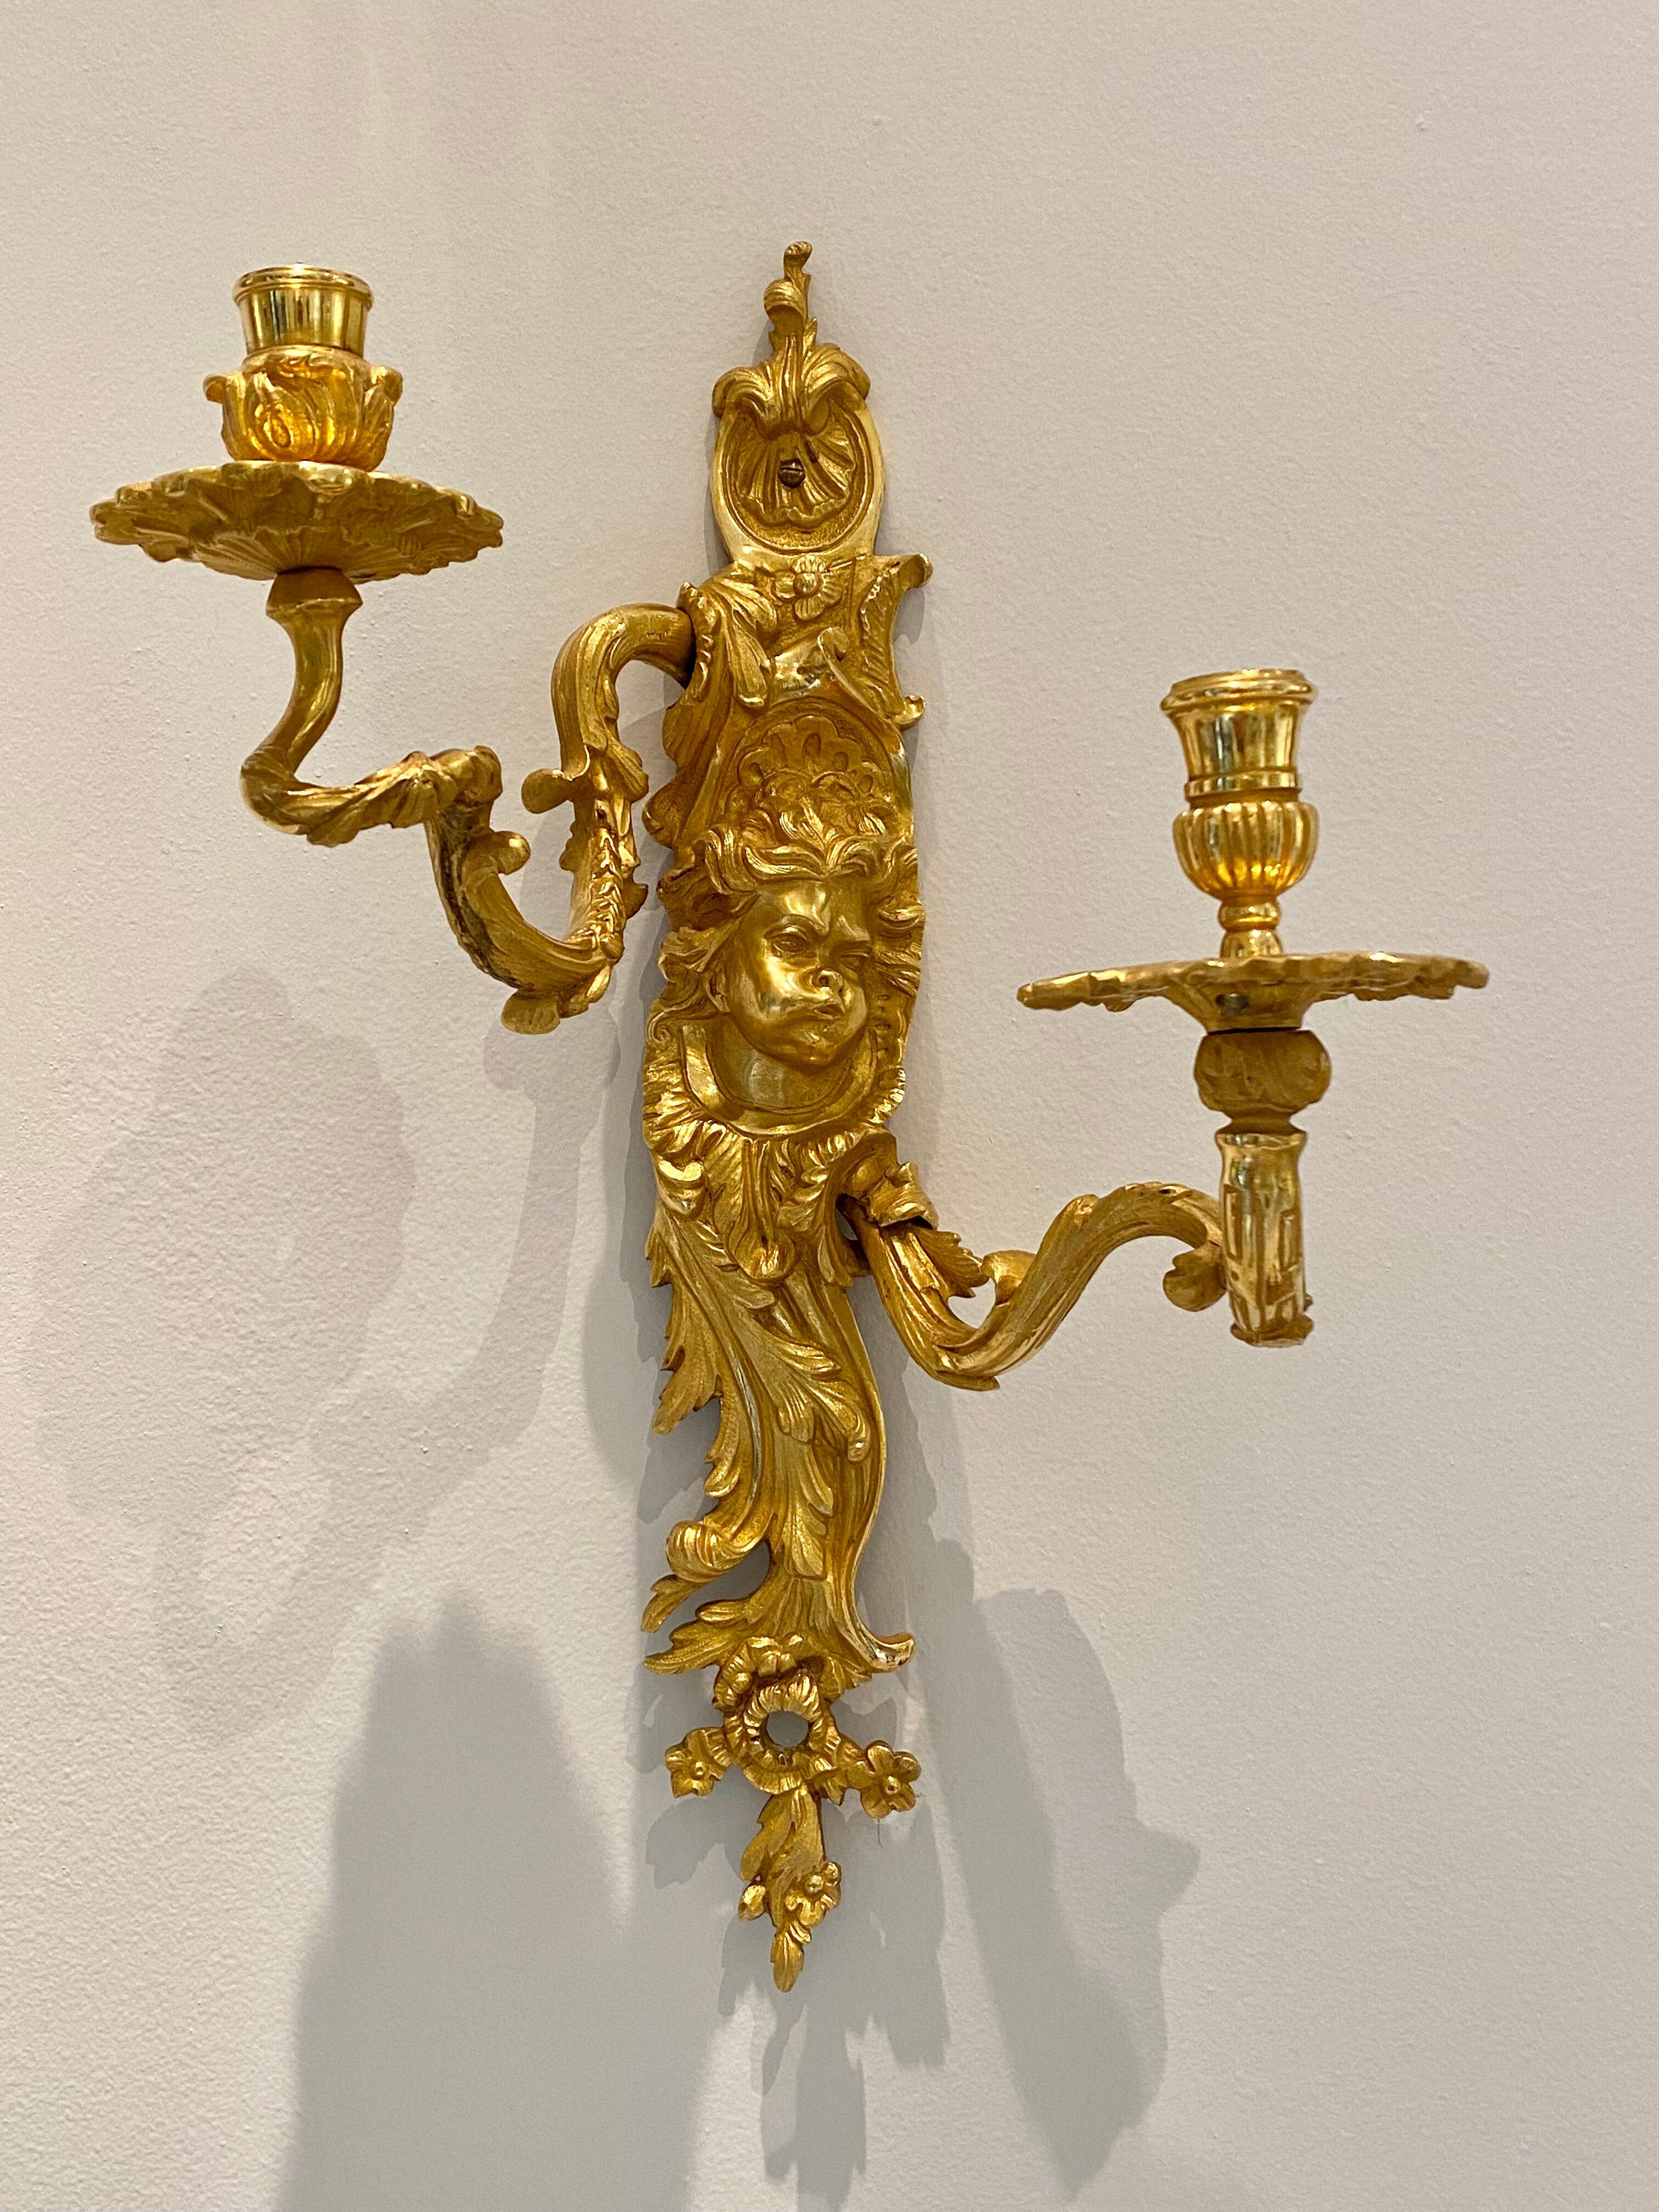 Fine pair of gilded and sculpted ormolu  bronze sconces in Louis XV style. They each feature two arms that wind out from the stem and upward like branches. Each stem is richly decorated with scrolling foliage, shells, flowers, and cherubs'